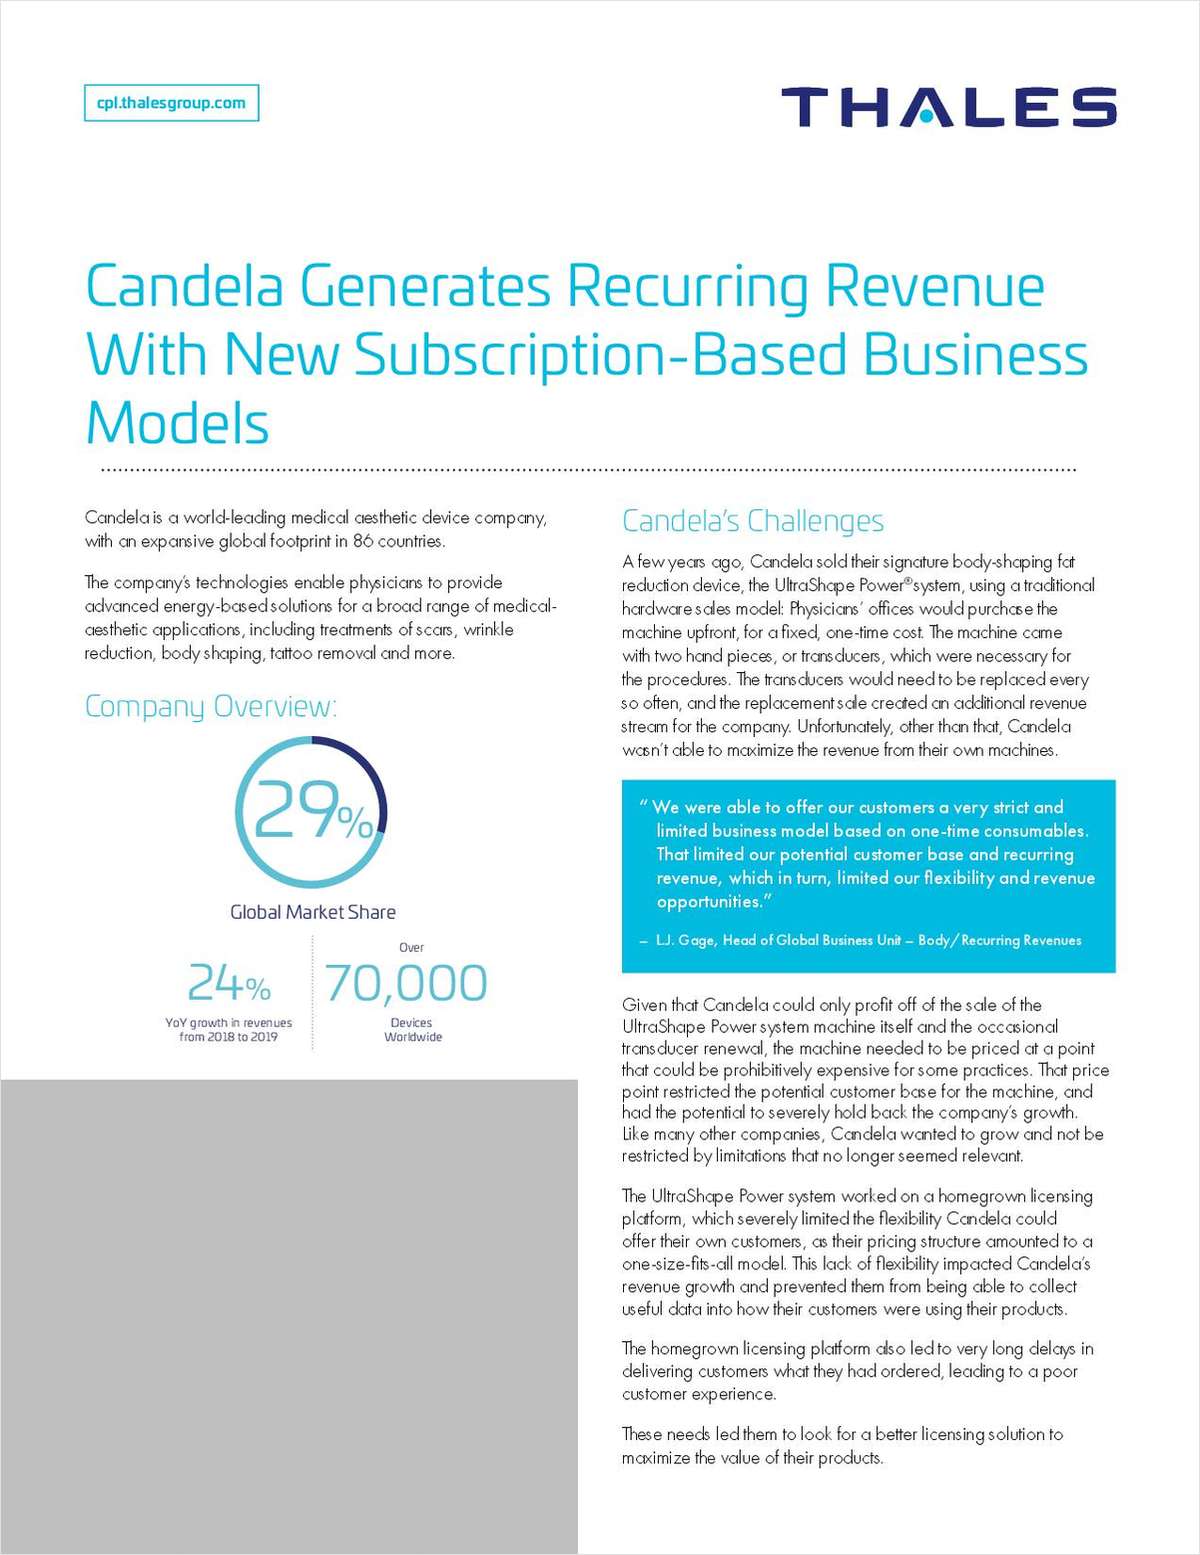 Generate New Recurring Revenue with Subscription-Based Models like Candela